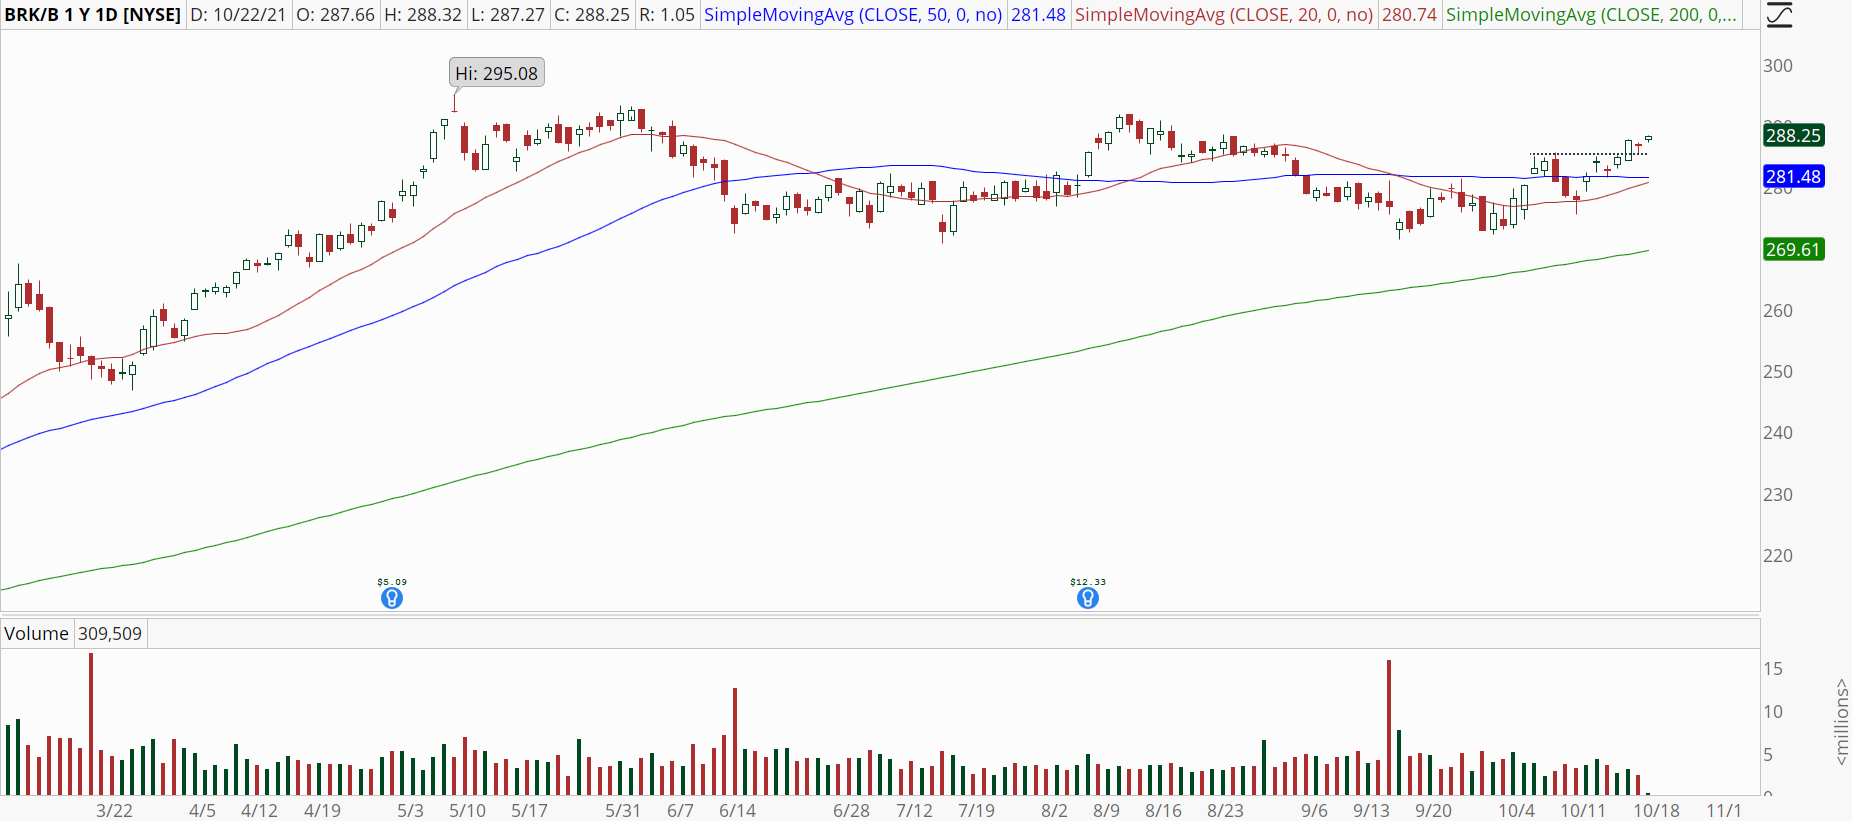 Berkshire Hathaway (BRK.B) chart with recent breakout